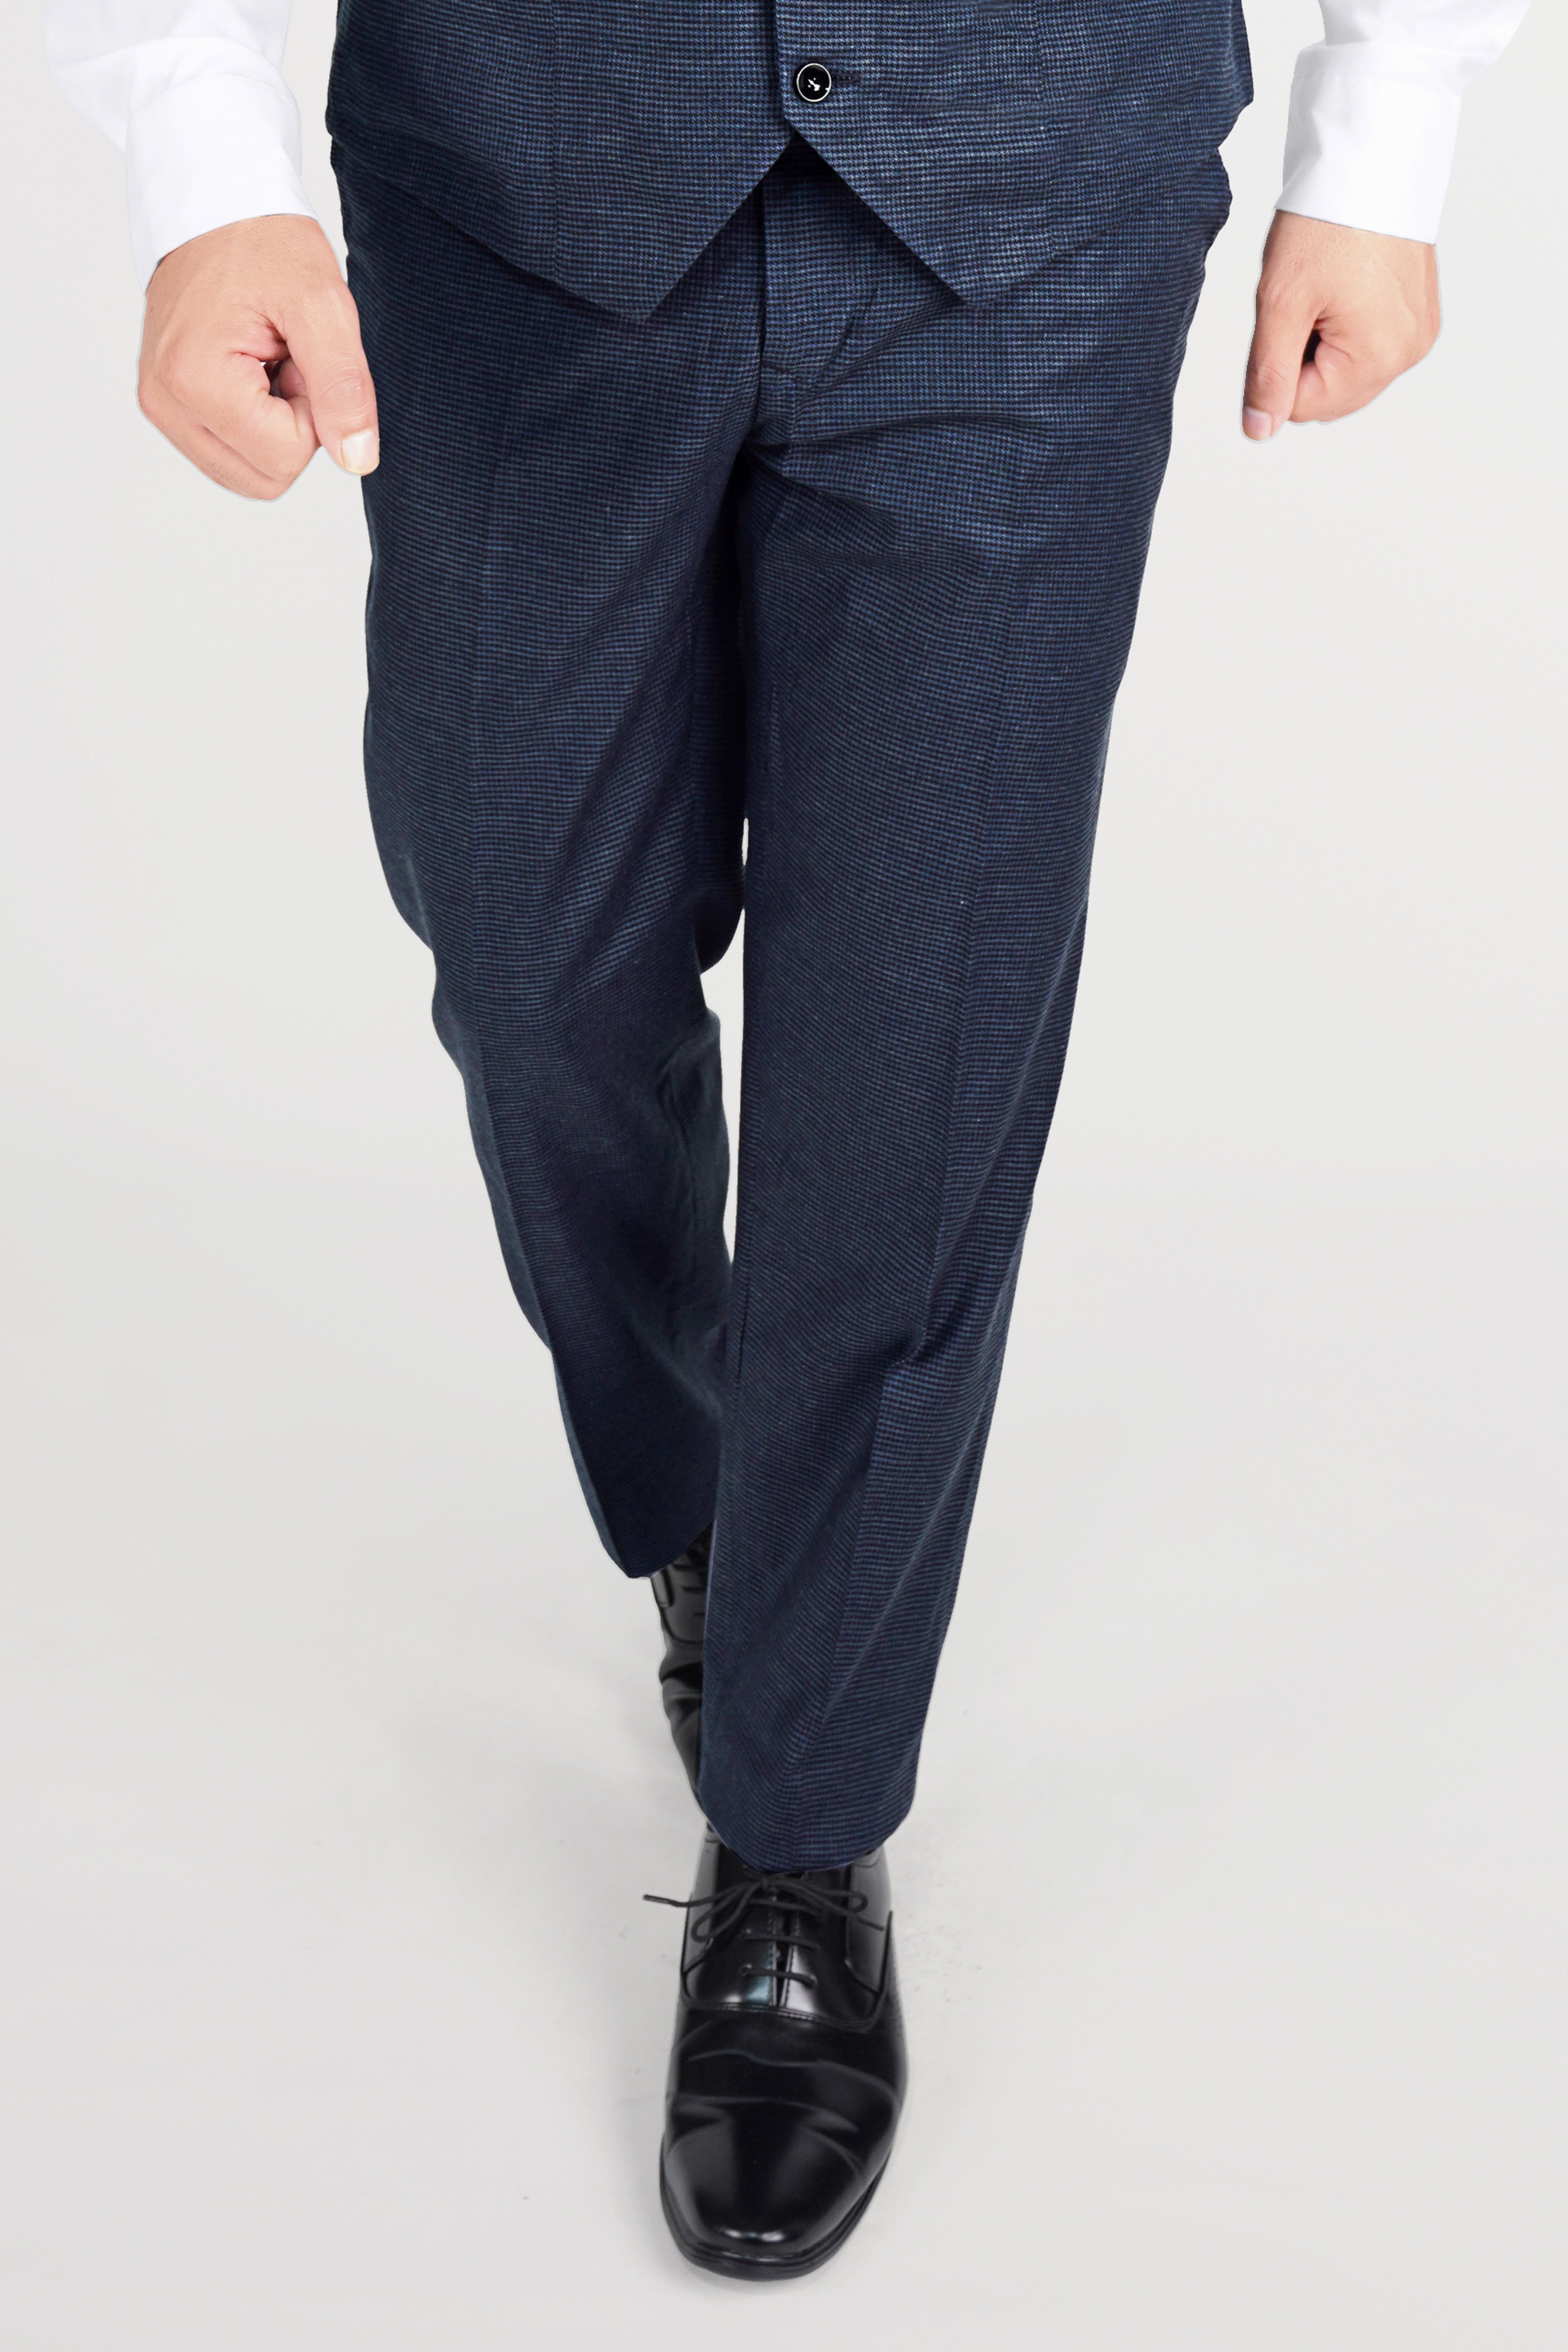 Limed Spruce Blue Wool Rich Pant With Houndstooth Pattern T2824-28, T2824-30, T2824-32, T2824-34, T2824-36, T2824-38, T2824-40, T2824-42, T2824-44